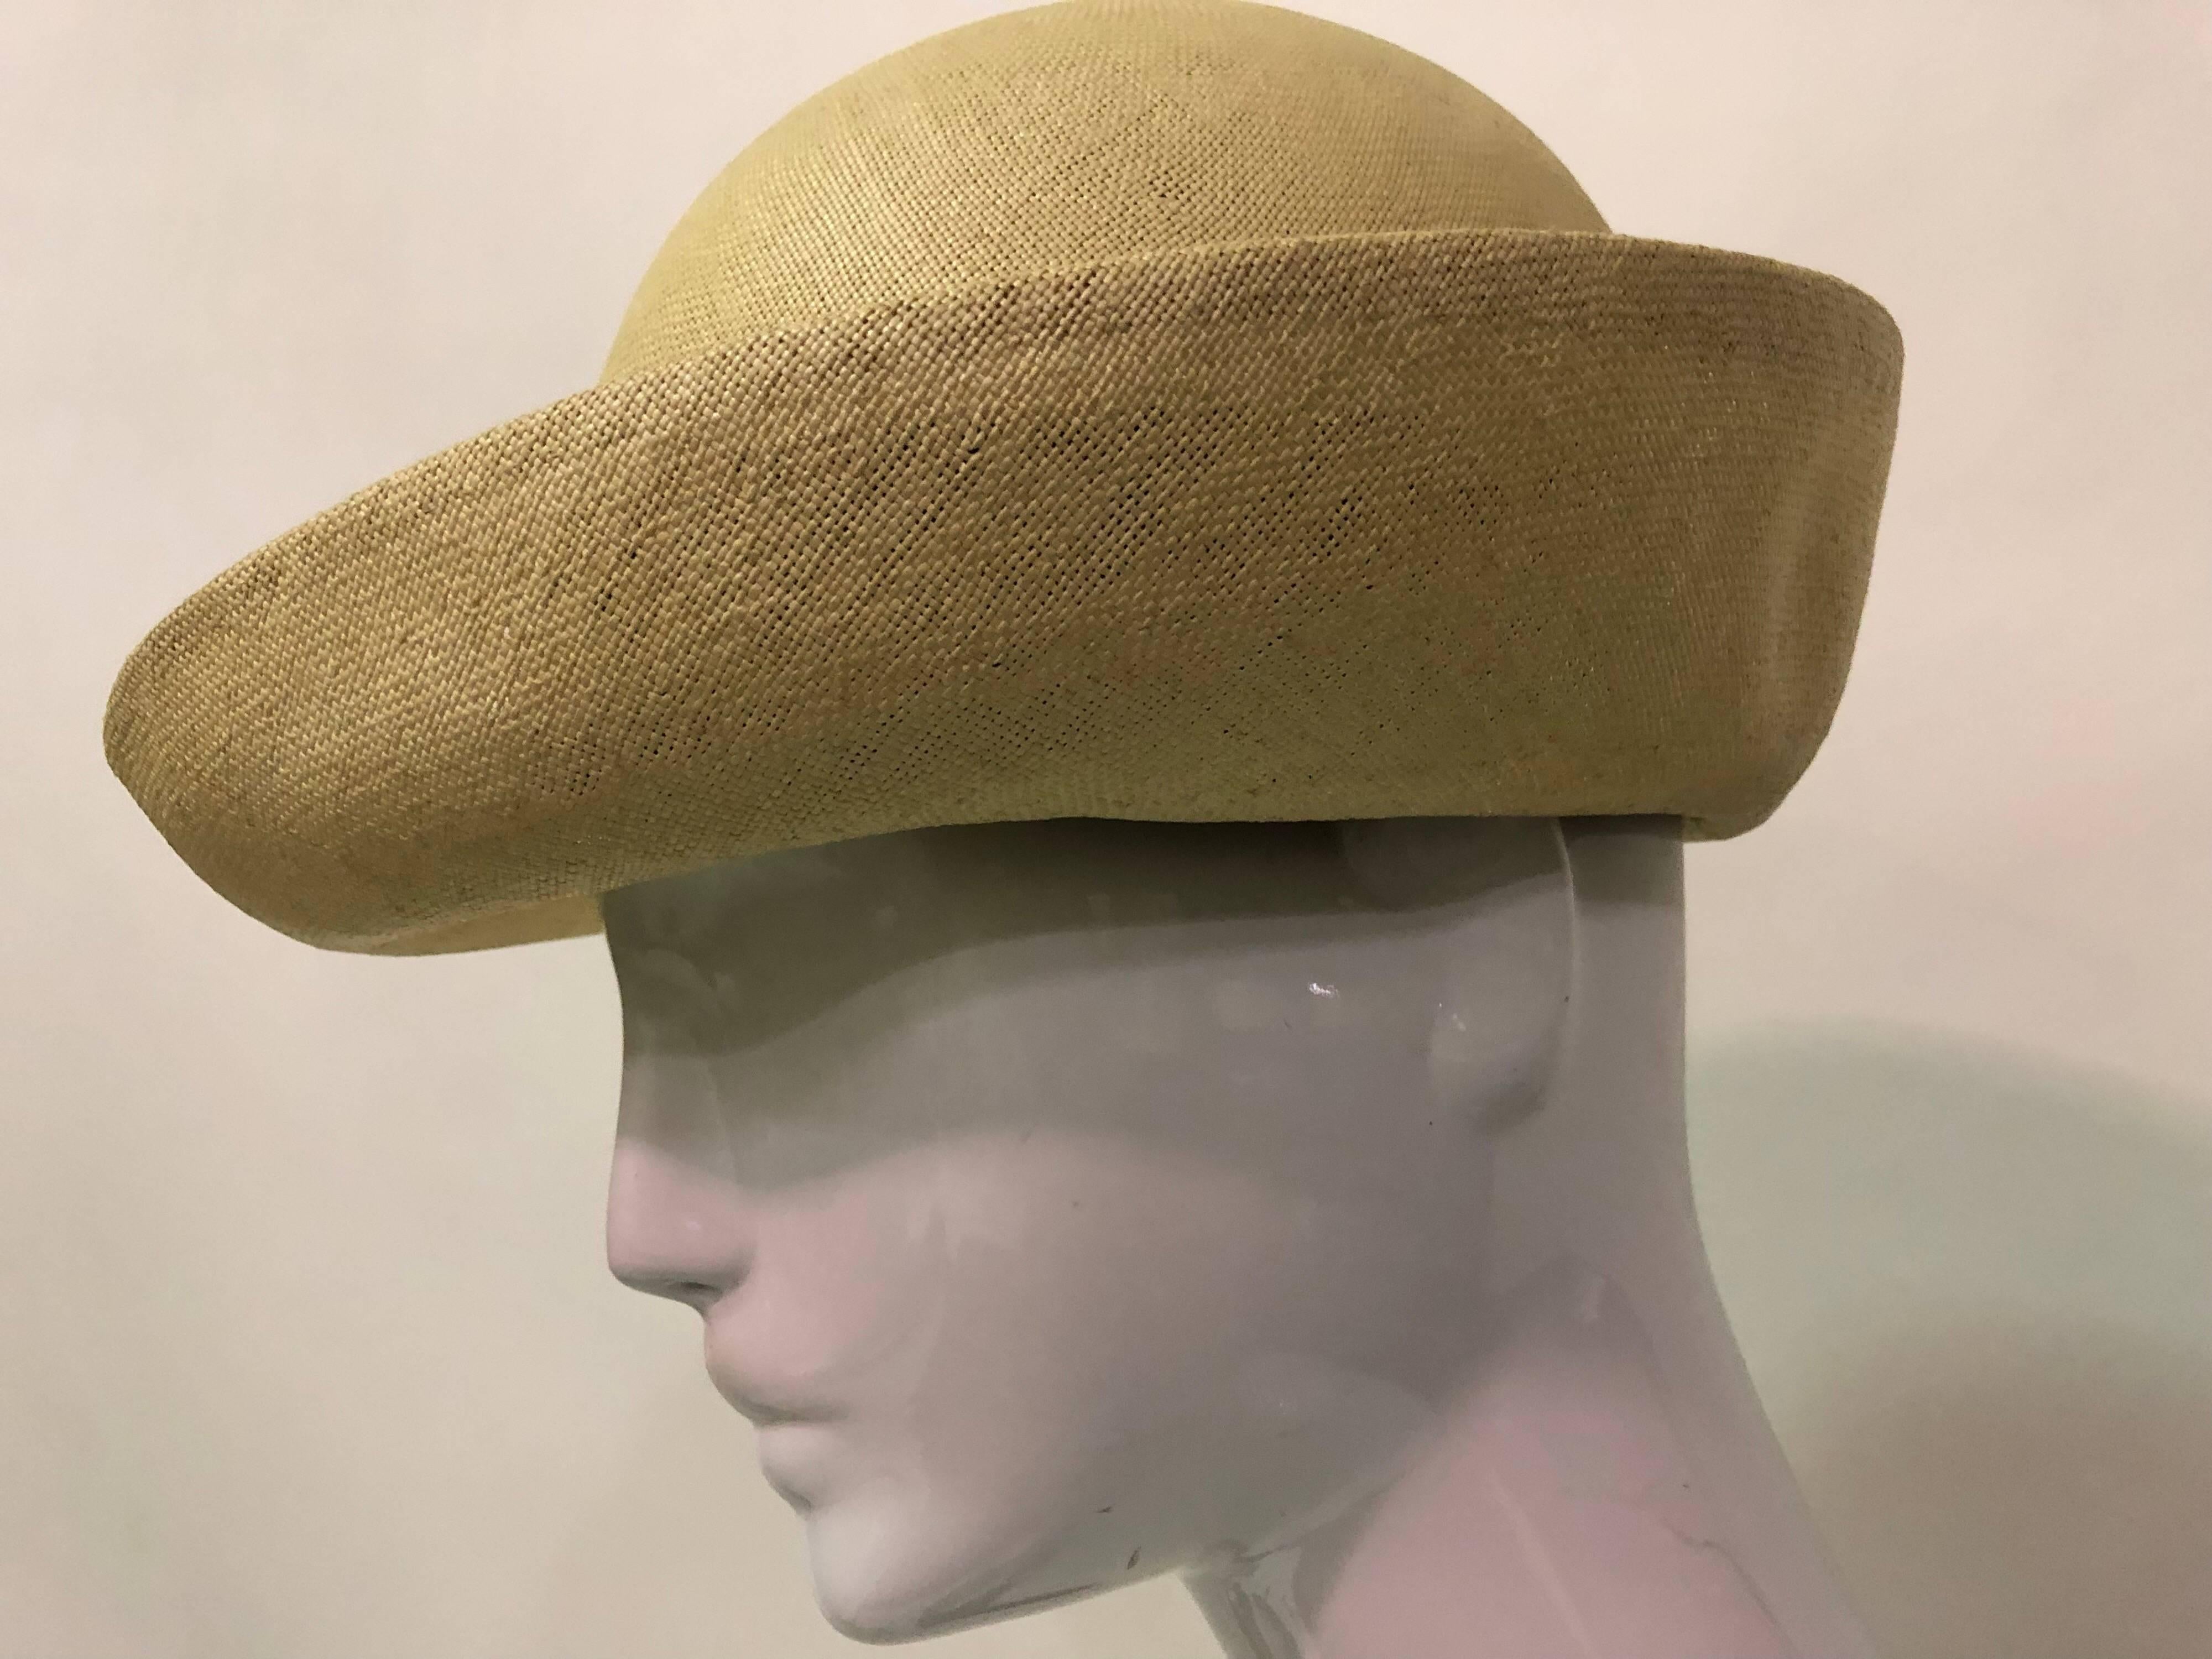 1960s James Galanos Panama-weave boater-style tailored natural straw summer hat with black grosgrain band and navy blue silk lined crown.  Uniquely styled brim. 